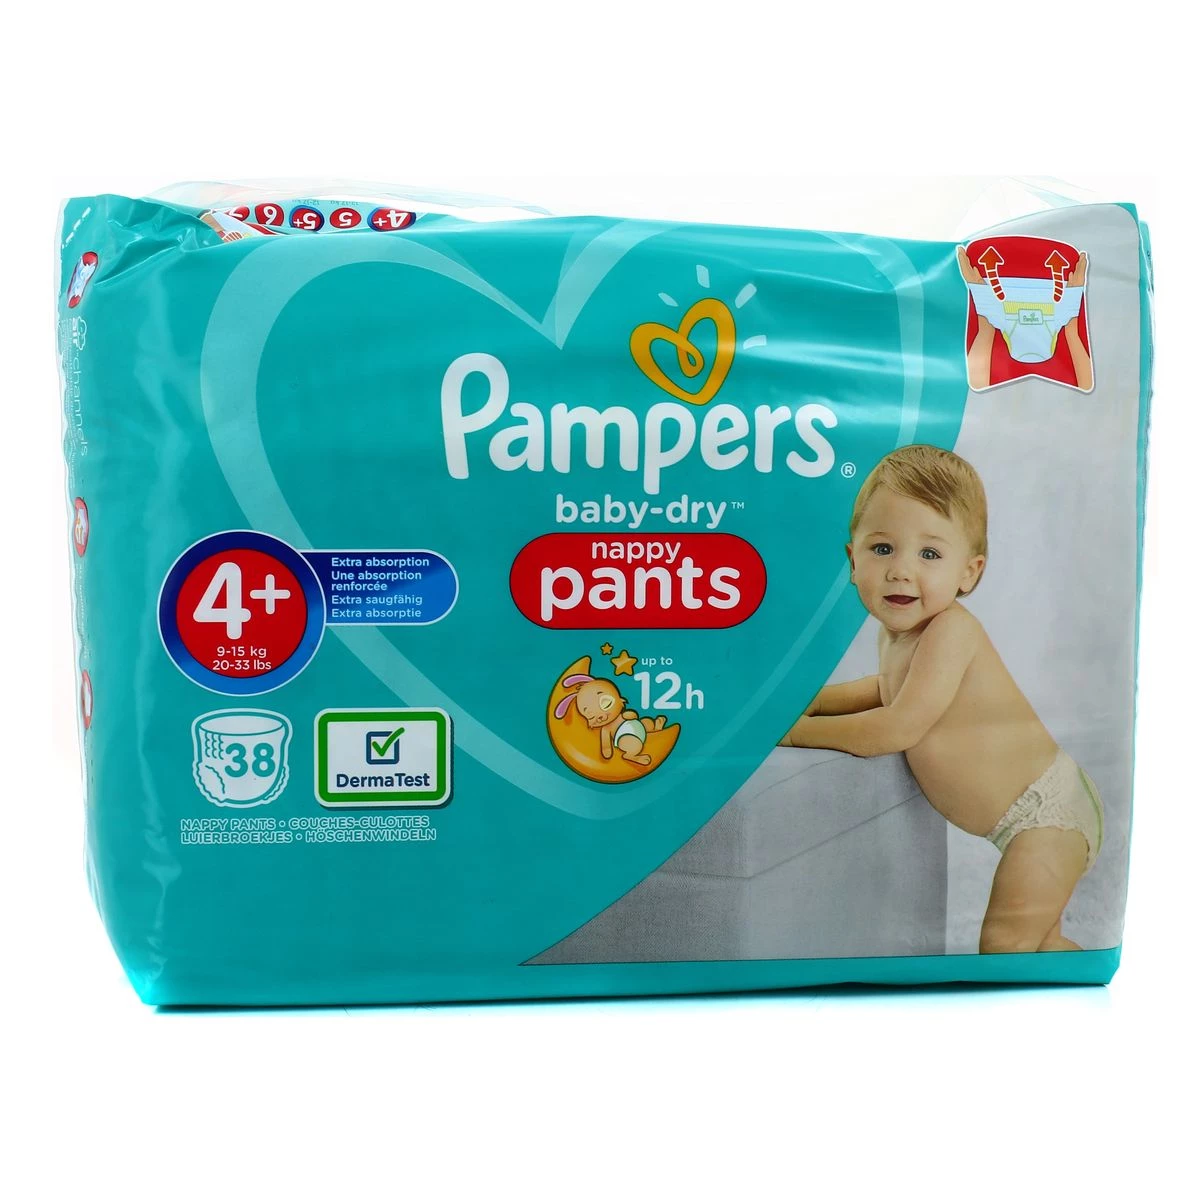 Pampers Pants Geant T4+ X38